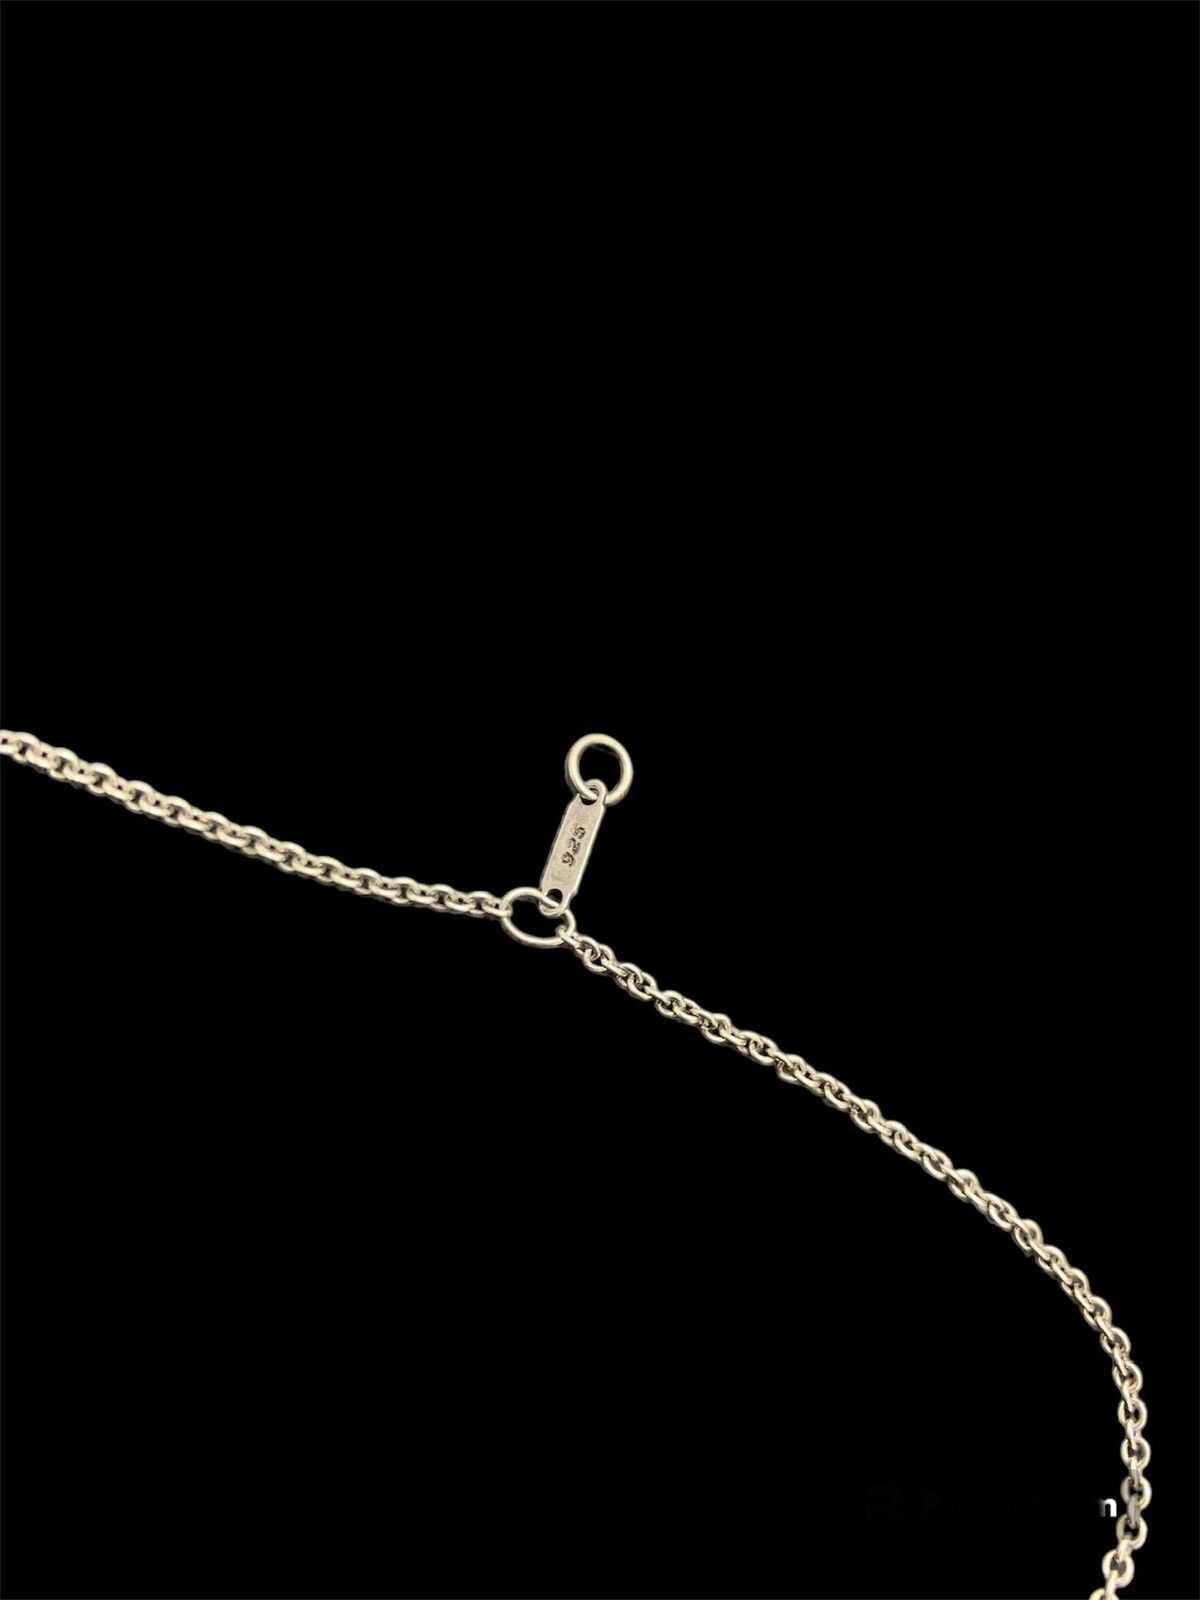 Tiffany Infinity Pendant Silver Necklace 925 - 3